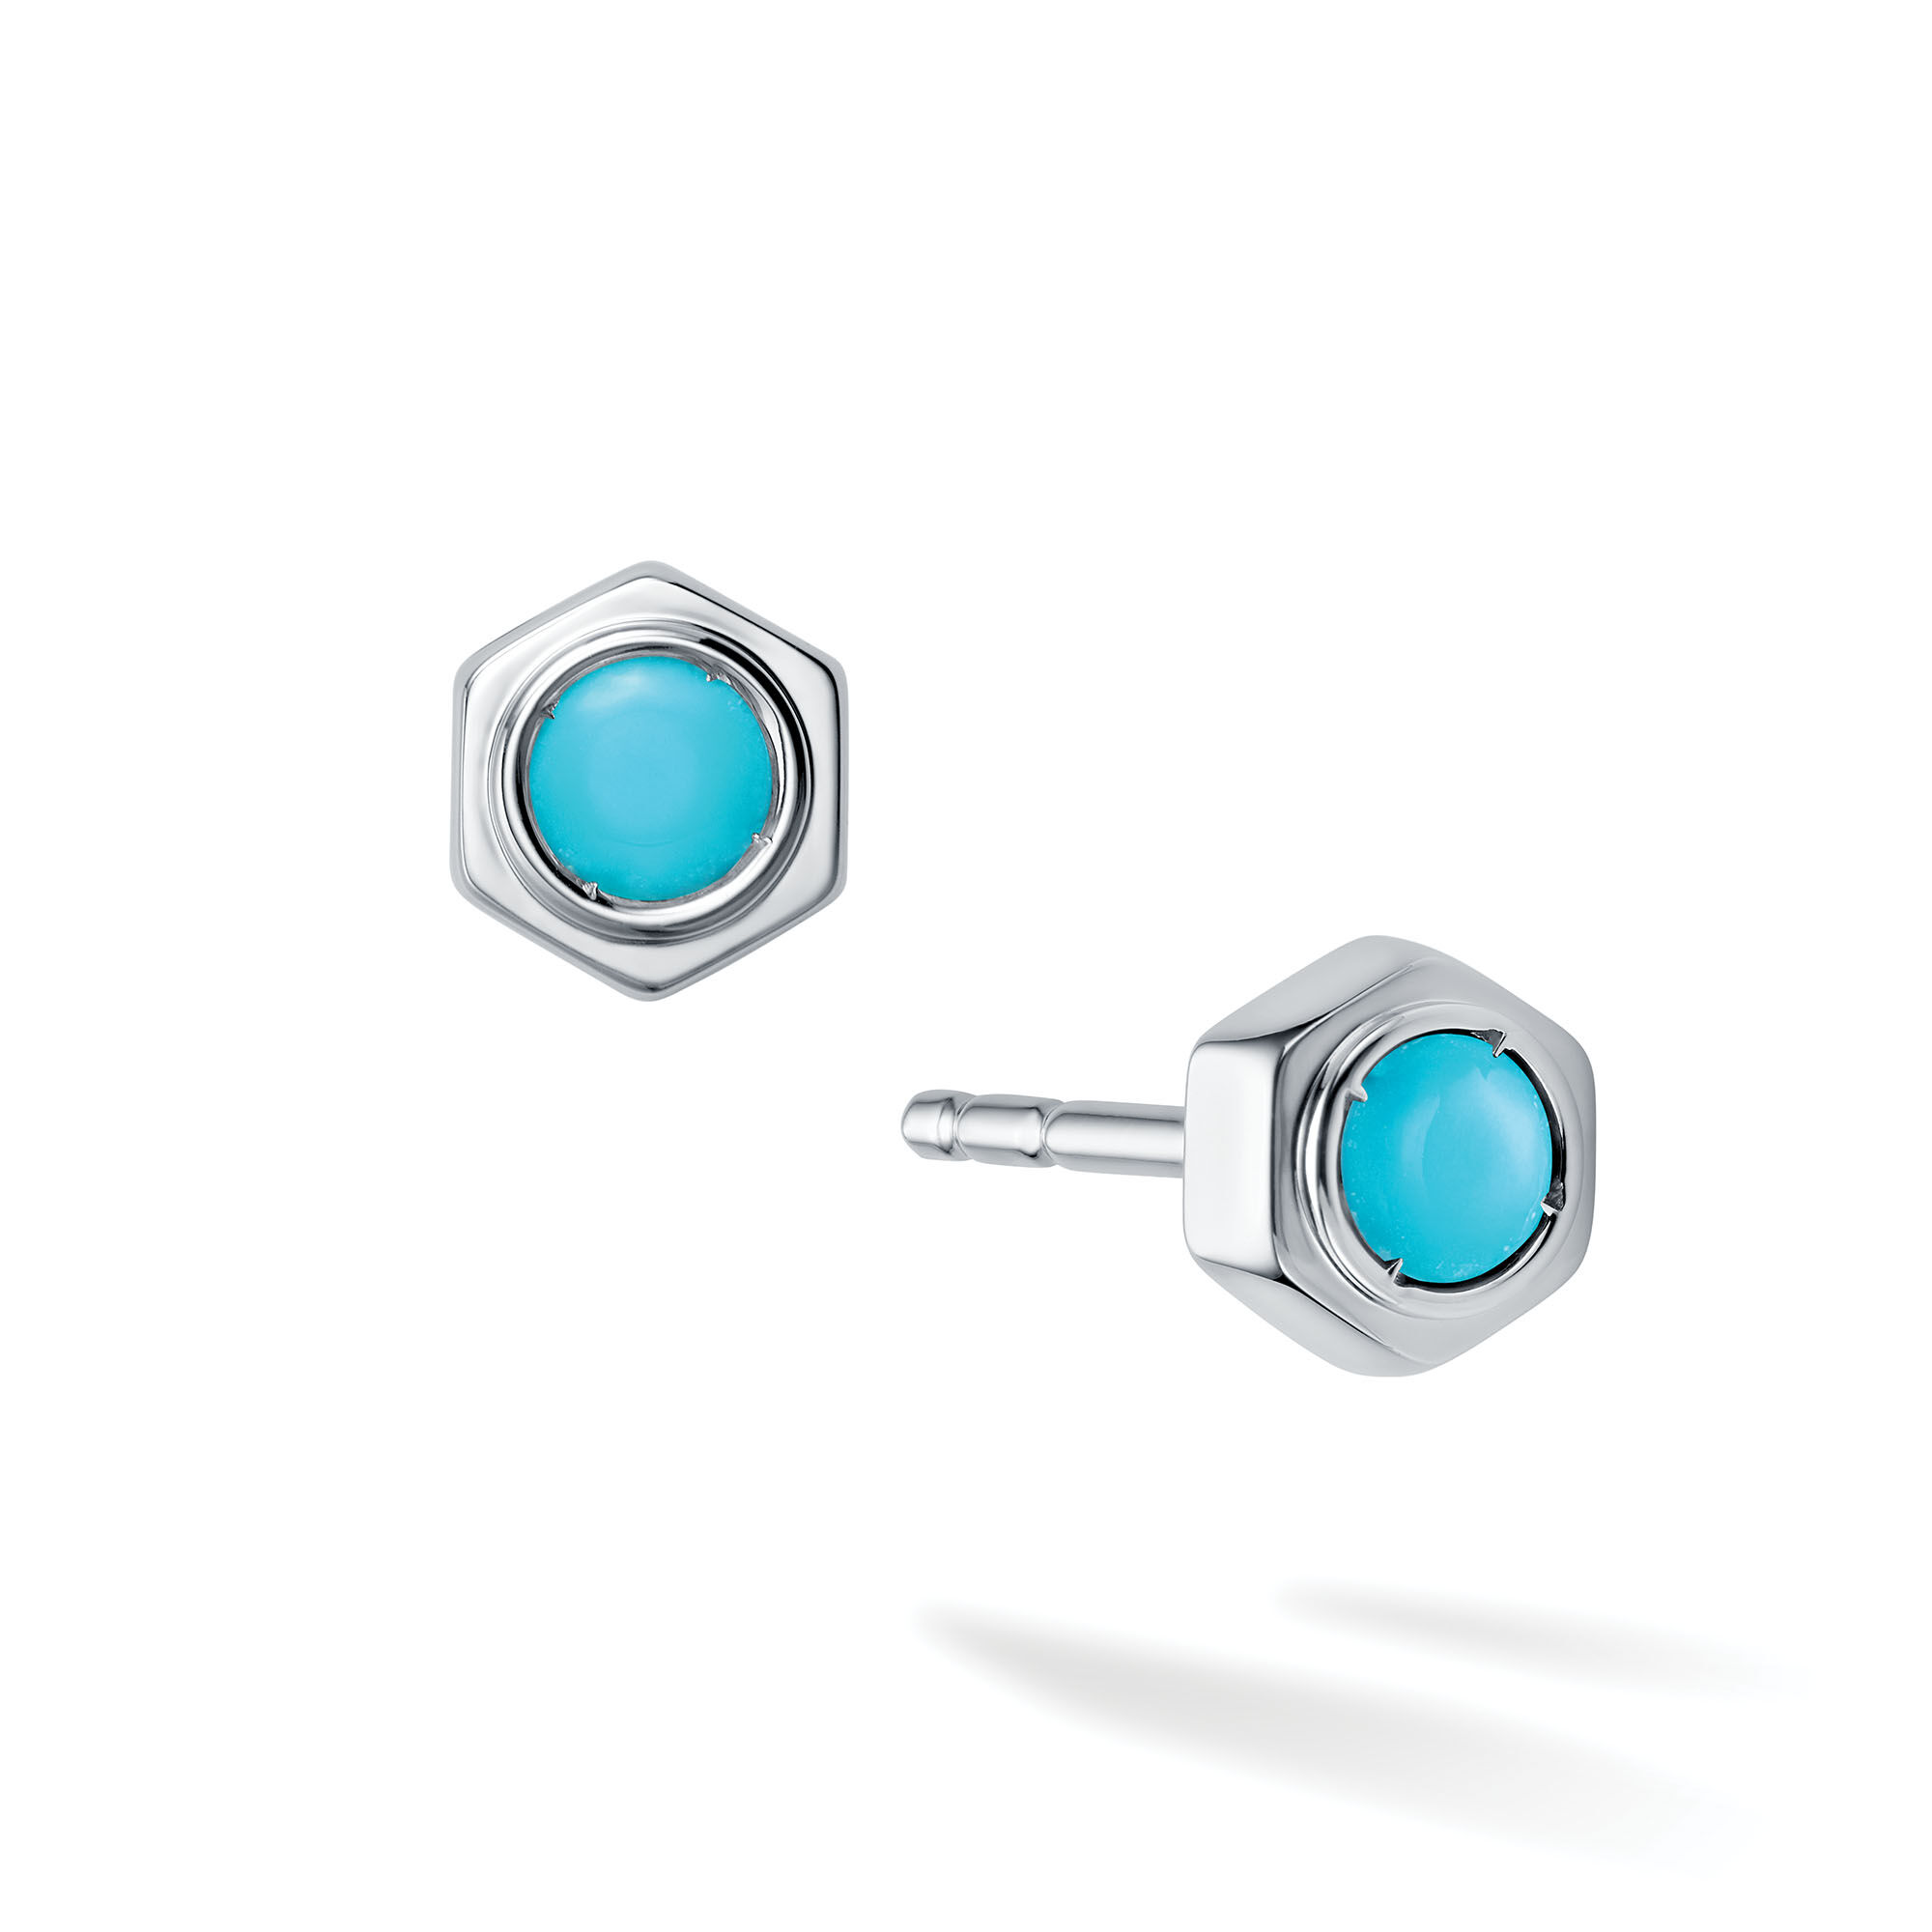 Birks Bee Chic | Turquoise and Silver Stud Earrings